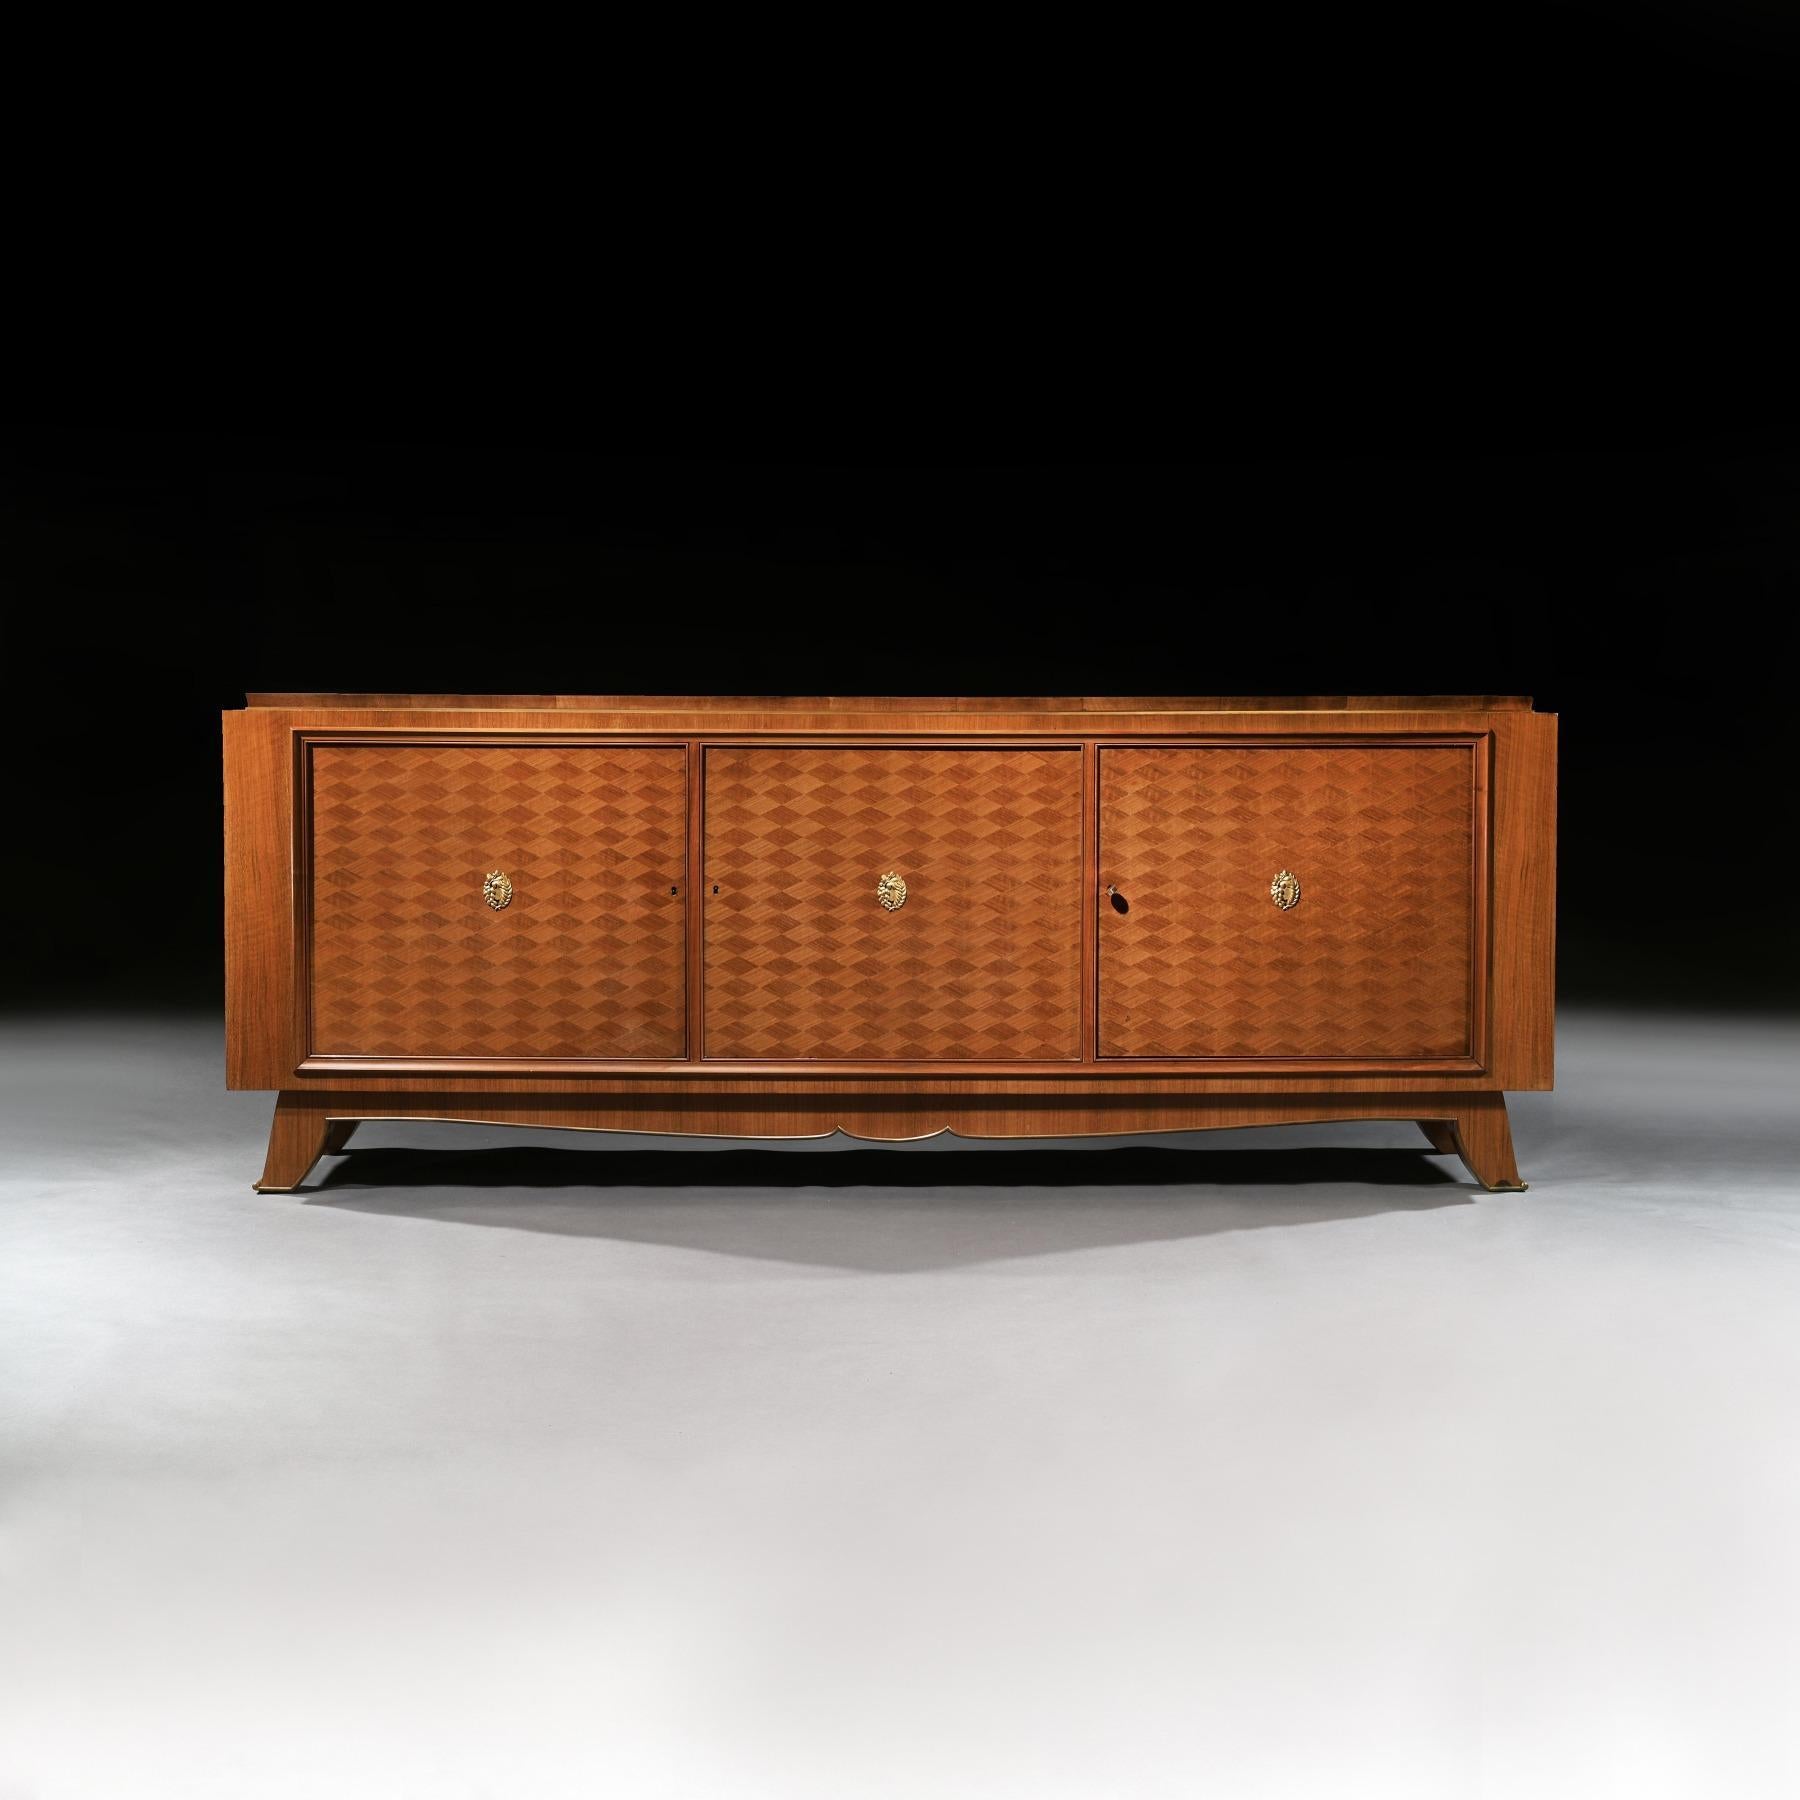 An exceptional three-door walnut and bronze French Art Deco buffet or sideboard designed and signed by Jules Leleu (1883-1961).

French - Paris, circa 1940

Extremely well constructed, as one would expect, from solid oak, veneered in European